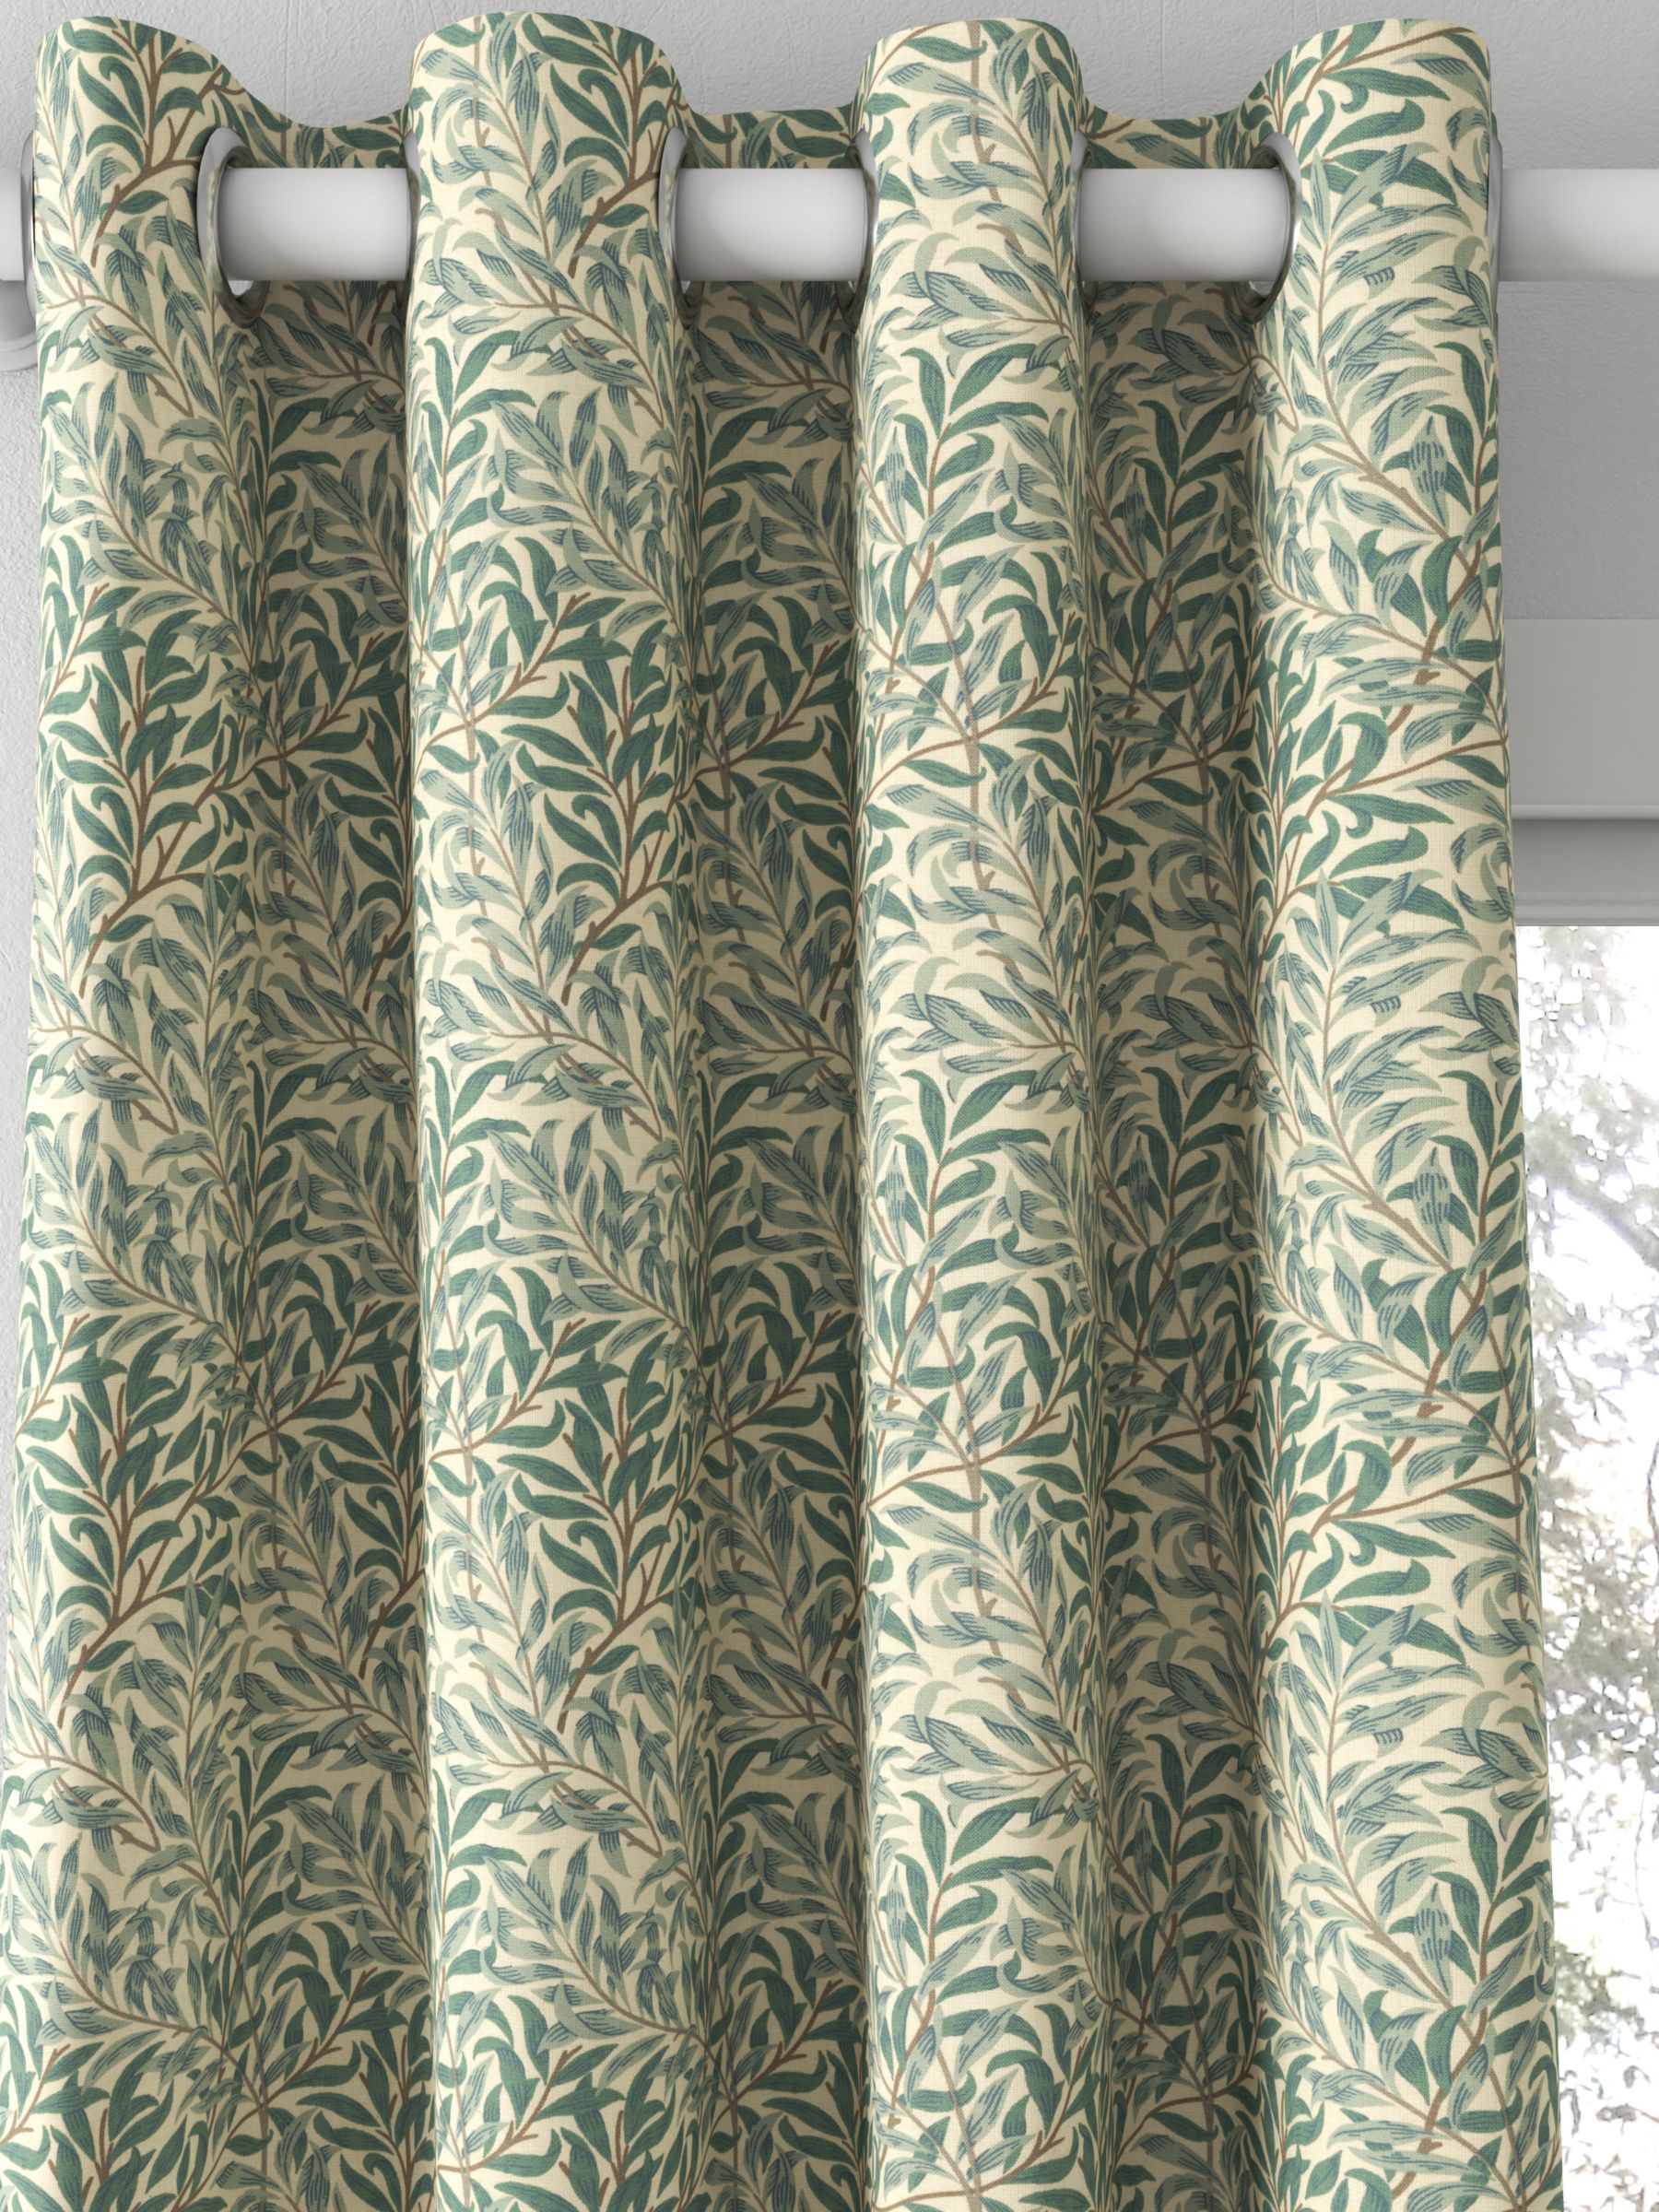 Morris & Co. Willow Boughs Minor Made to Measure Curtains, Privet/Honeycombe